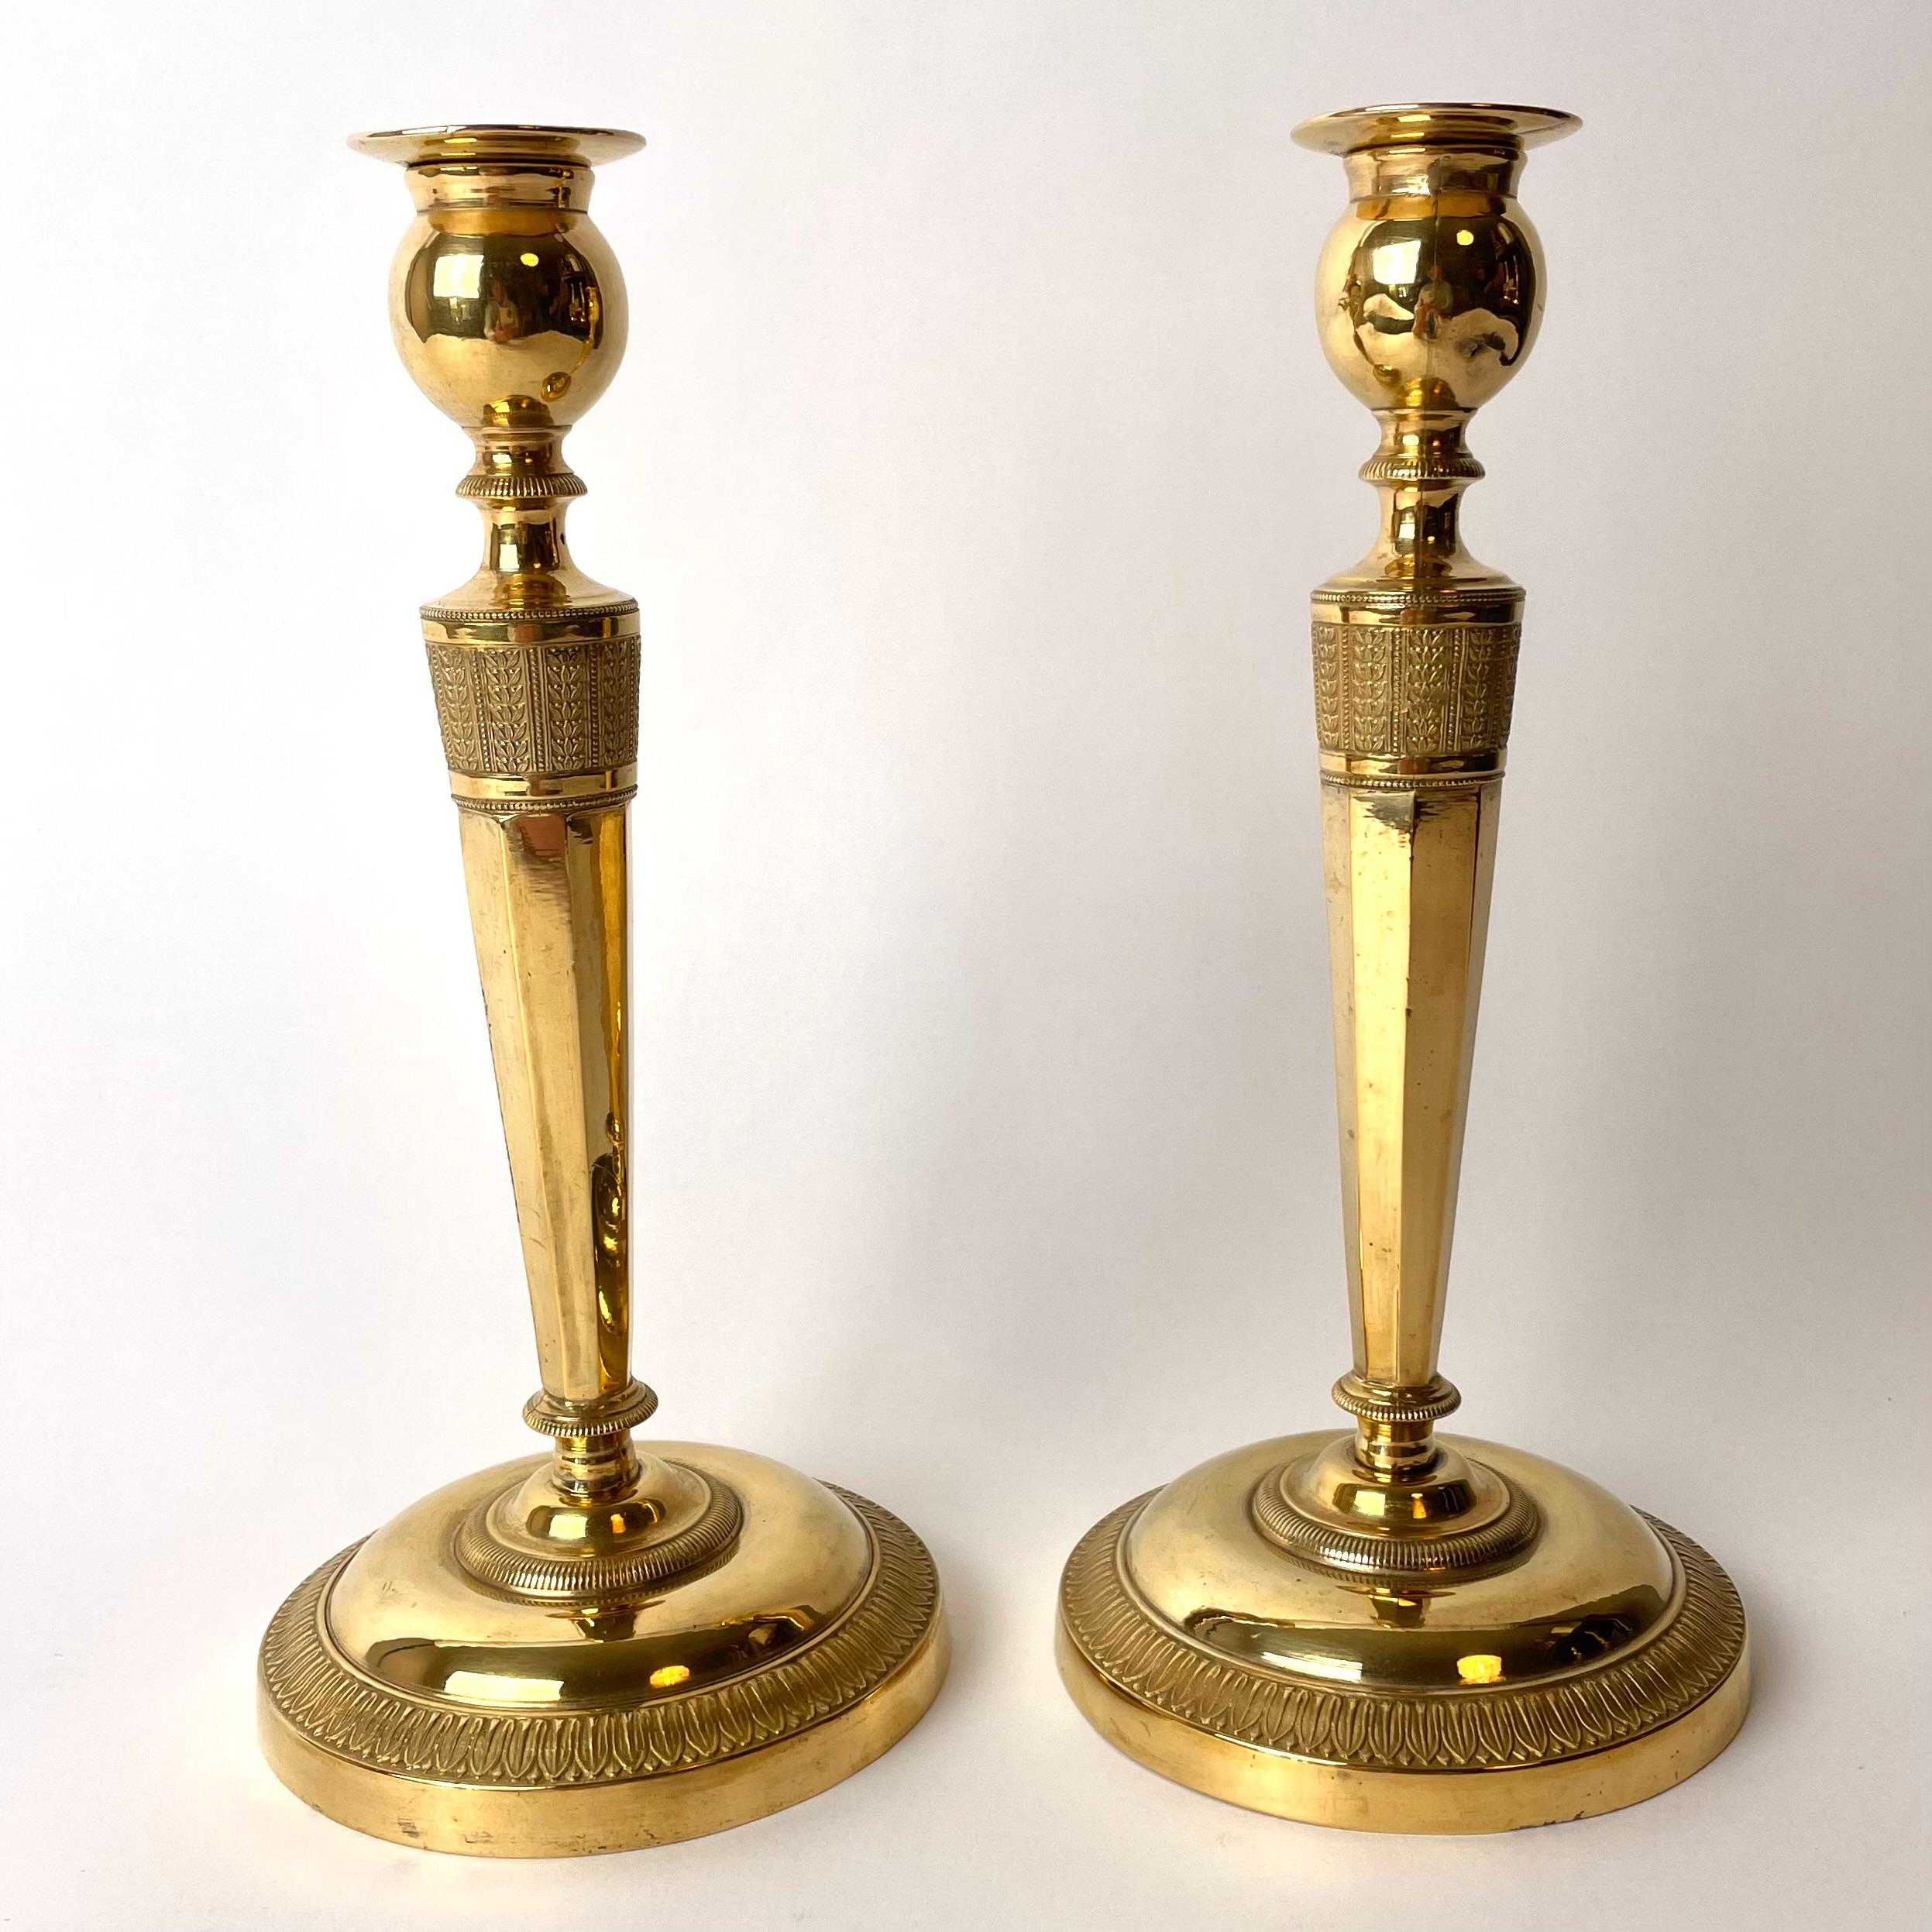 A pair of sophisticated and elegant gilt bronze Candlesticks, Probably made in Paris, France. Directoire circa 1795. Beautifully decorated with leaves.

Wear consistent with age and use.